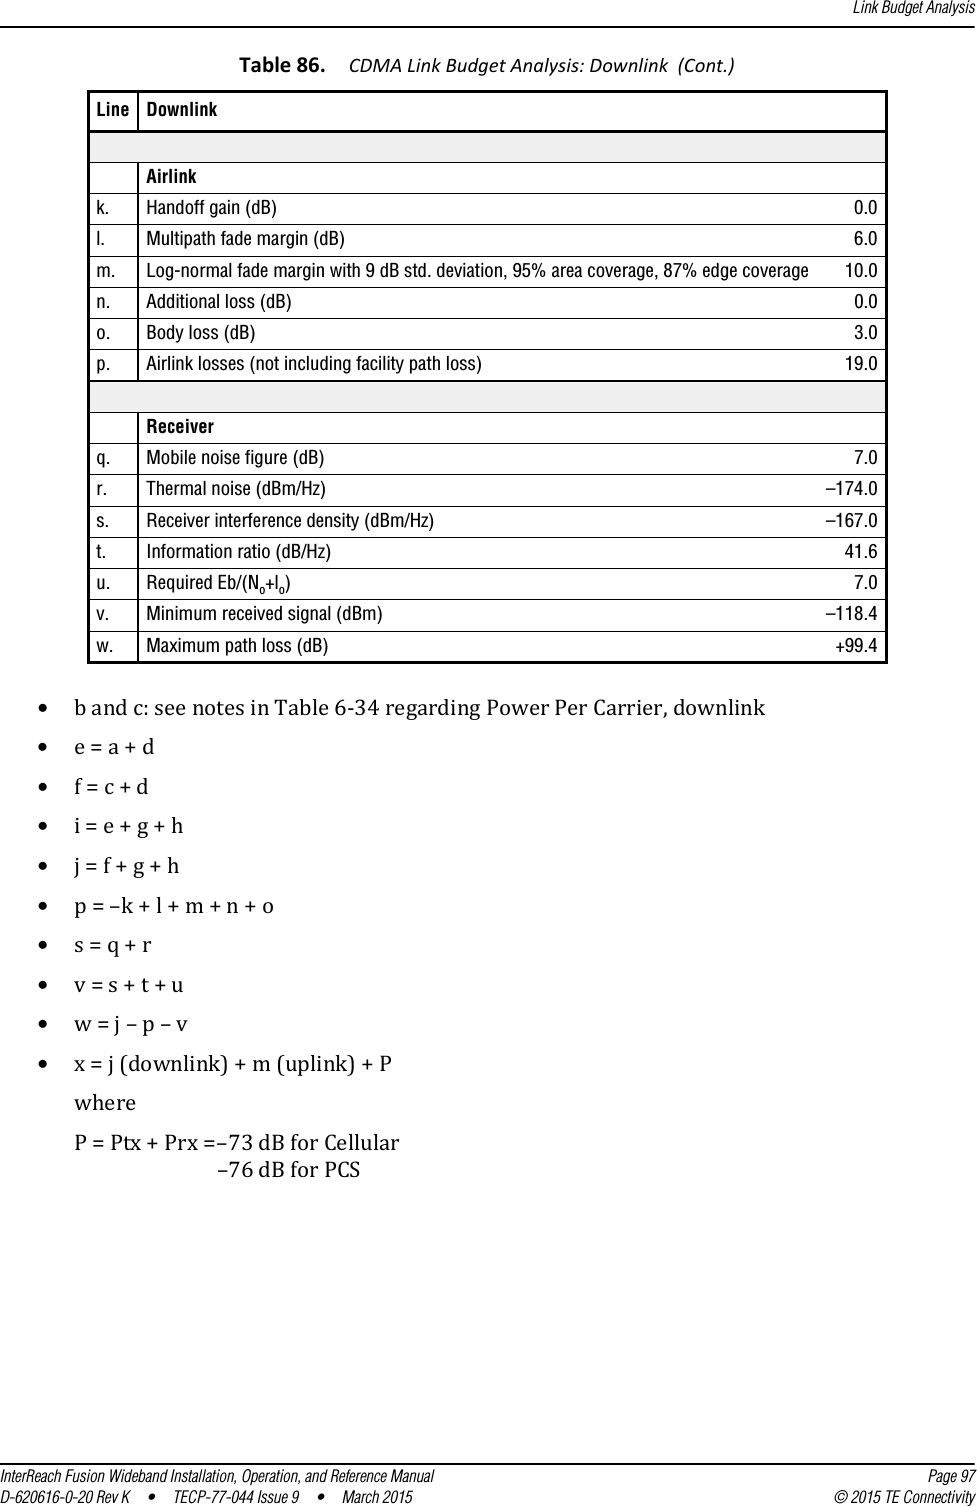 Link Budget AnalysisInterReach Fusion Wideband Installation, Operation, and Reference Manual Page 97D-620616-0-20 Rev K  •  TECP-77-044 Issue 9  •  March 2015 © 2015 TE Connectivity•b and c: see notes in Table 6-34 regarding Power Per Carrier, downlink•e = a + d•f = c + d•i = e + g + h•j = f + g + h•p = –k + l + m + n + o•s = q + r•v = s + t + u•w = j – p – v•x = j (downlink) + m (uplink) + PwhereP = Ptx + Prx =–73 dB for Cellular –76 dB for PCSAirlink k. Handoff gain (dB) 0.0l. Multipath fade margin (dB) 6.0m. Log-normal fade margin with 9 dB std. deviation, 95% area coverage, 87% edge coverage 10.0n. Additional loss (dB) 0.0o. Body loss (dB) 3.0p. Airlink losses (not including facility path loss) 19.0Receiver q. Mobile noise figure (dB) 7.0r. Thermal noise (dBm/Hz) –174.0s. Receiver interference density (dBm/Hz) –167.0t. Information ratio (dB/Hz) 41.6u. Required Eb/(No+lo)7.0v. Minimum received signal (dBm) –118.4w. Maximum path loss (dB) +99.4Table 86.  CDMA Link Budget Analysis: Downlink  (Cont.)Line Downlink